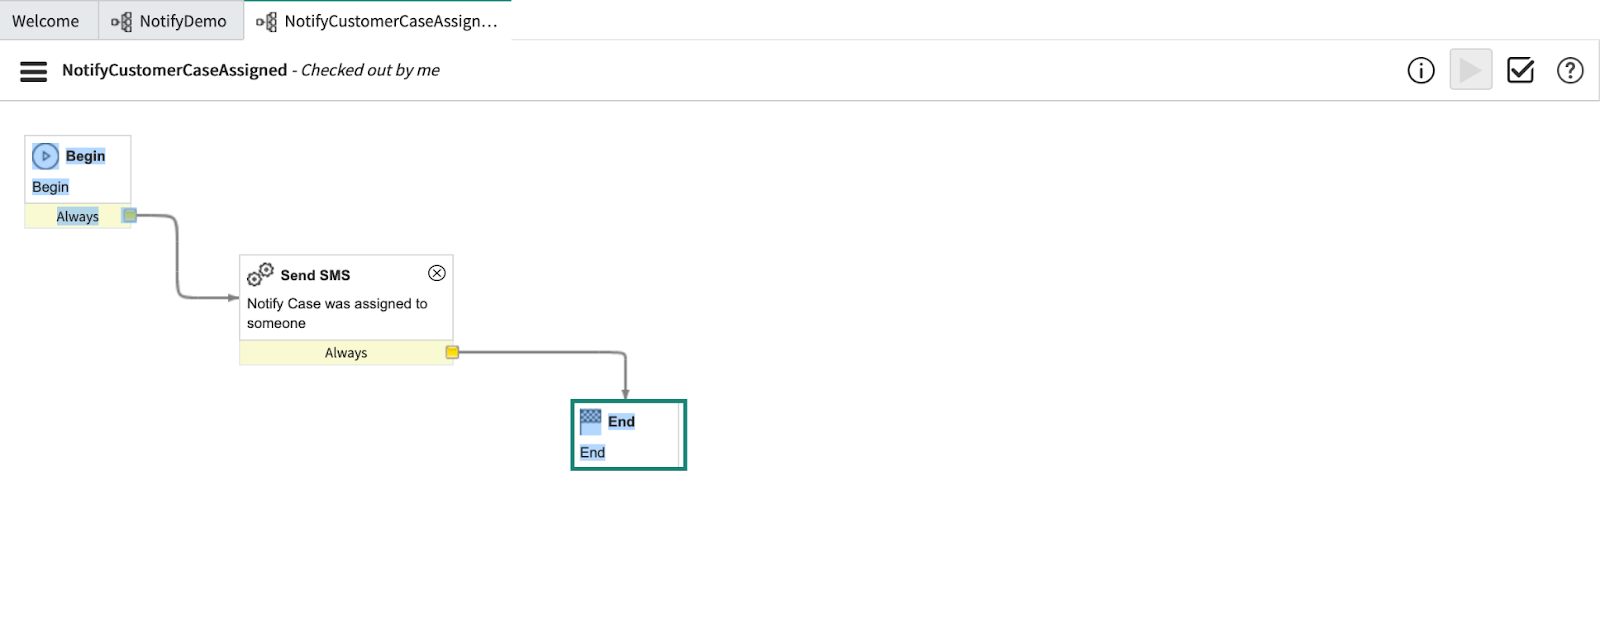 Linking boxes in ServiceNow workflows